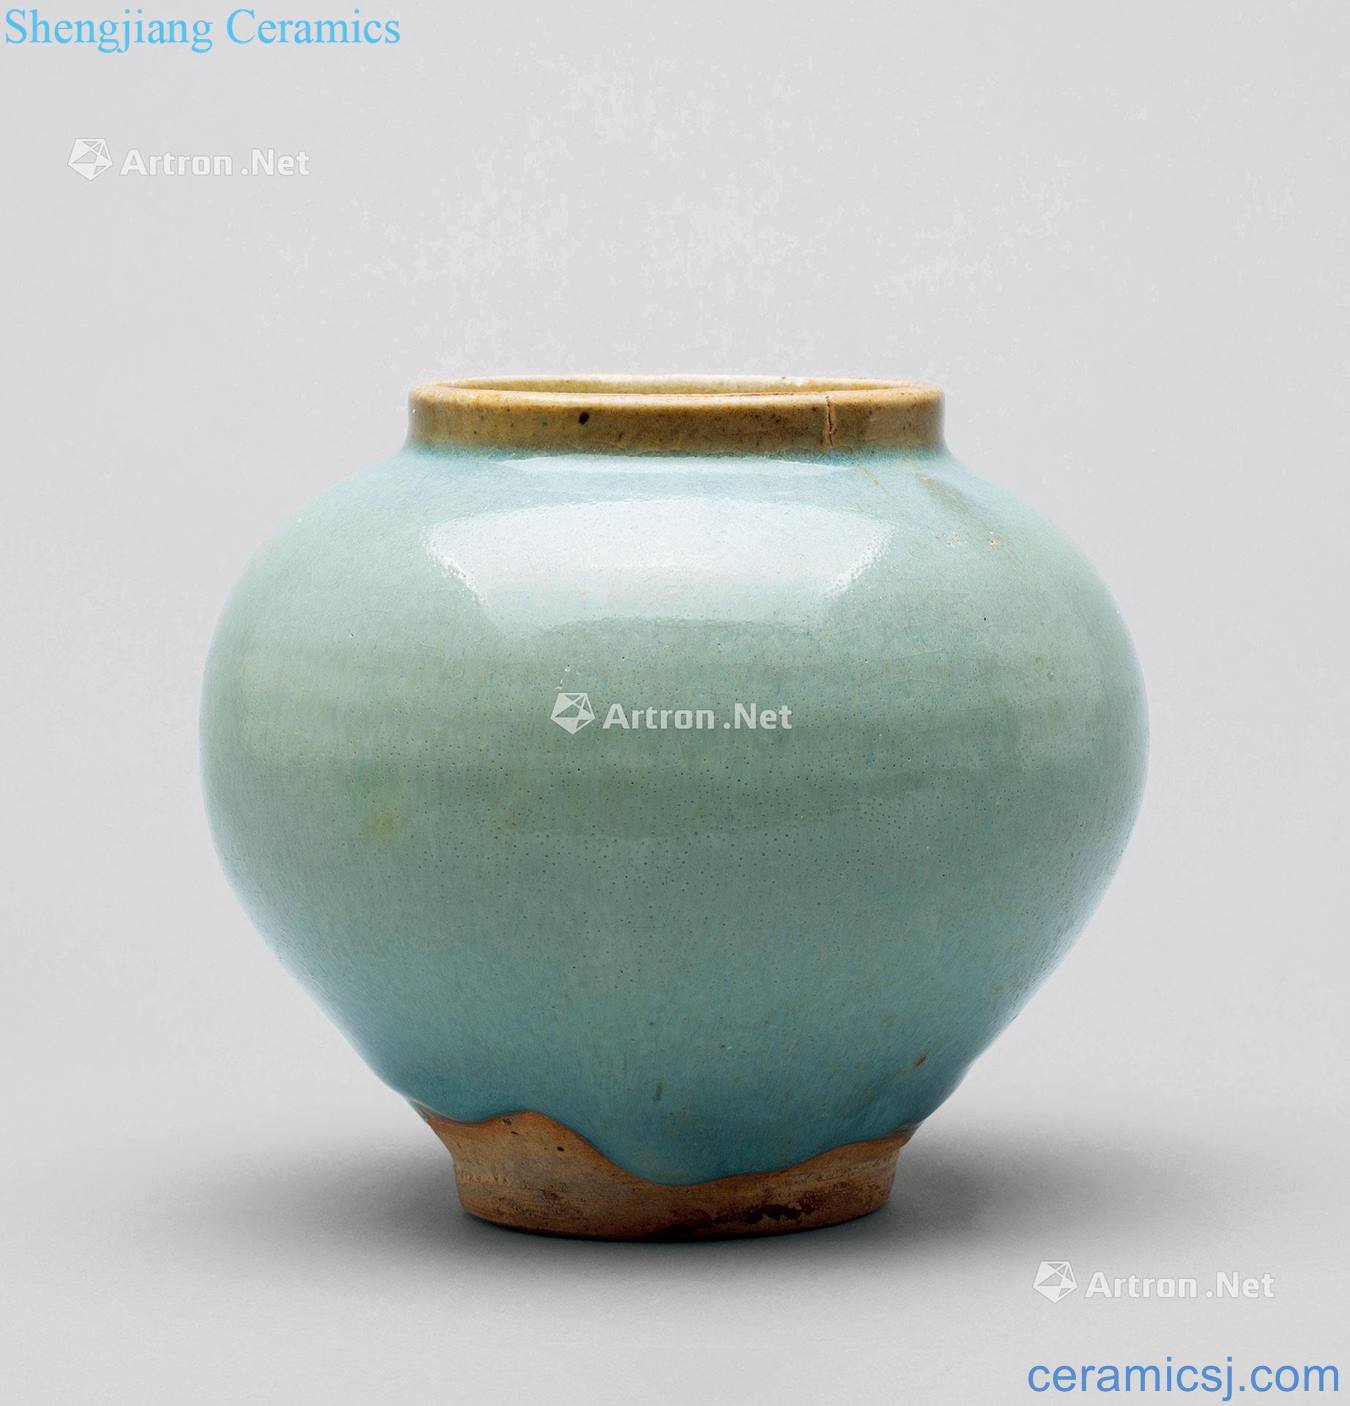 The yuan dynasty Sky blue glaze masterpieces cans